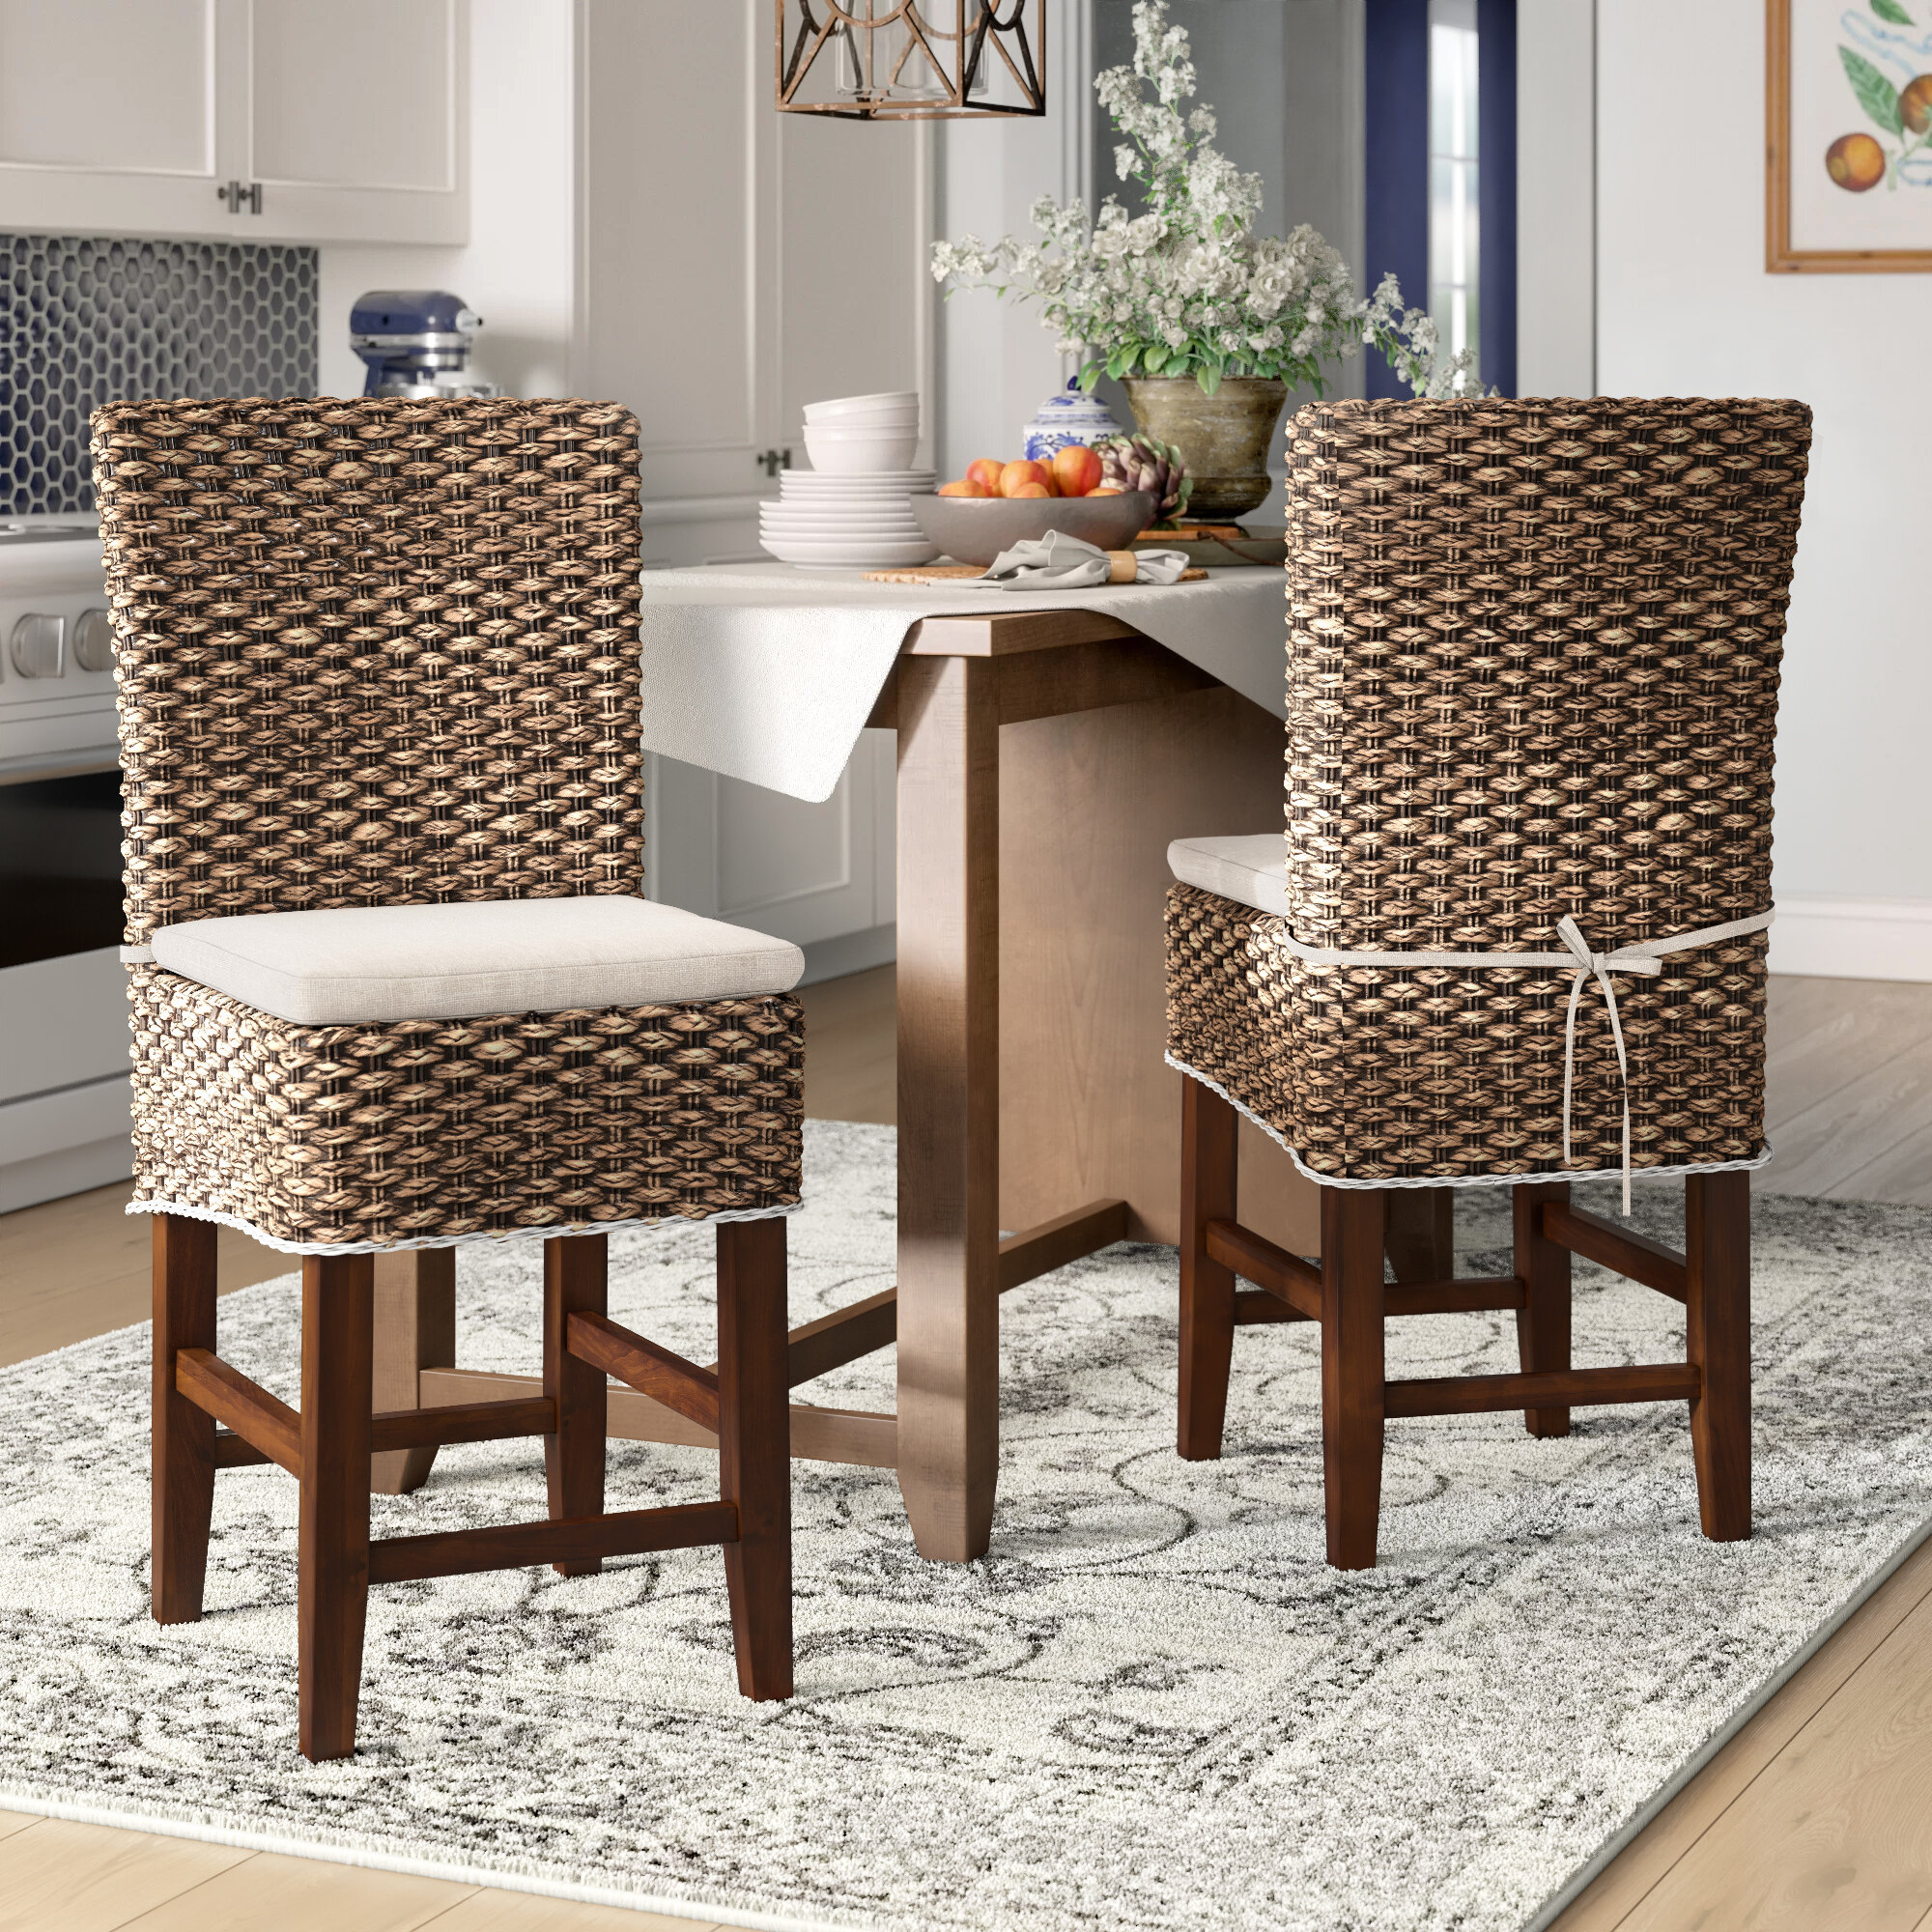 Brown Best Choice Products Set of 2 Elegant Hand Woven Seagrass Dining Side Chairs w//Sturdy Wooden Legs and High Backrest for Home Kitchen